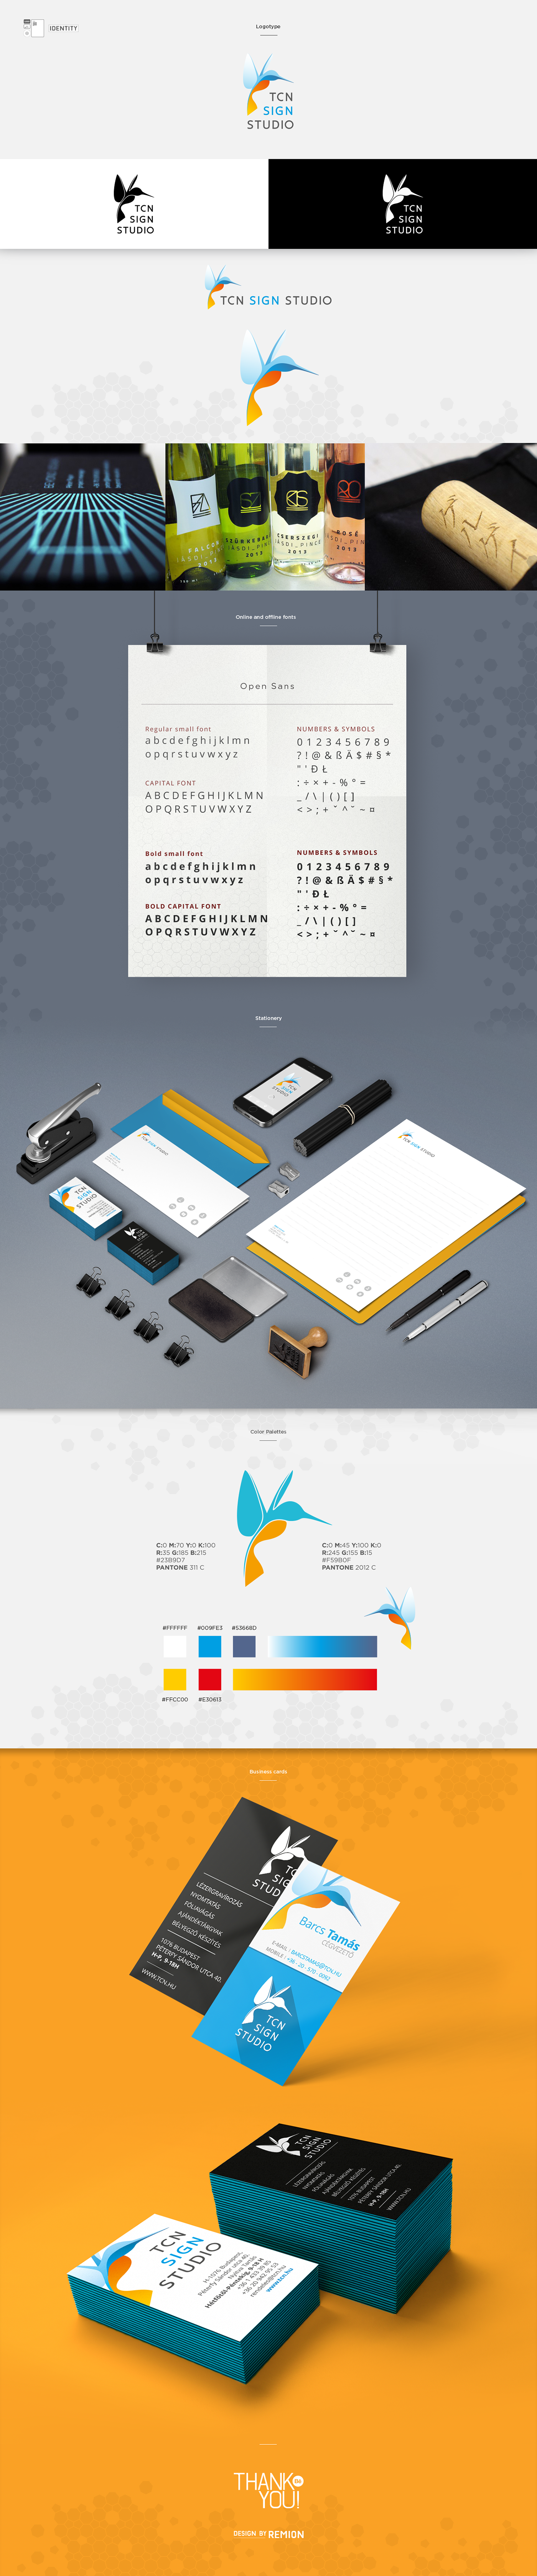 Tcn sign studio Remion corporate identity Stationery business card budapest print